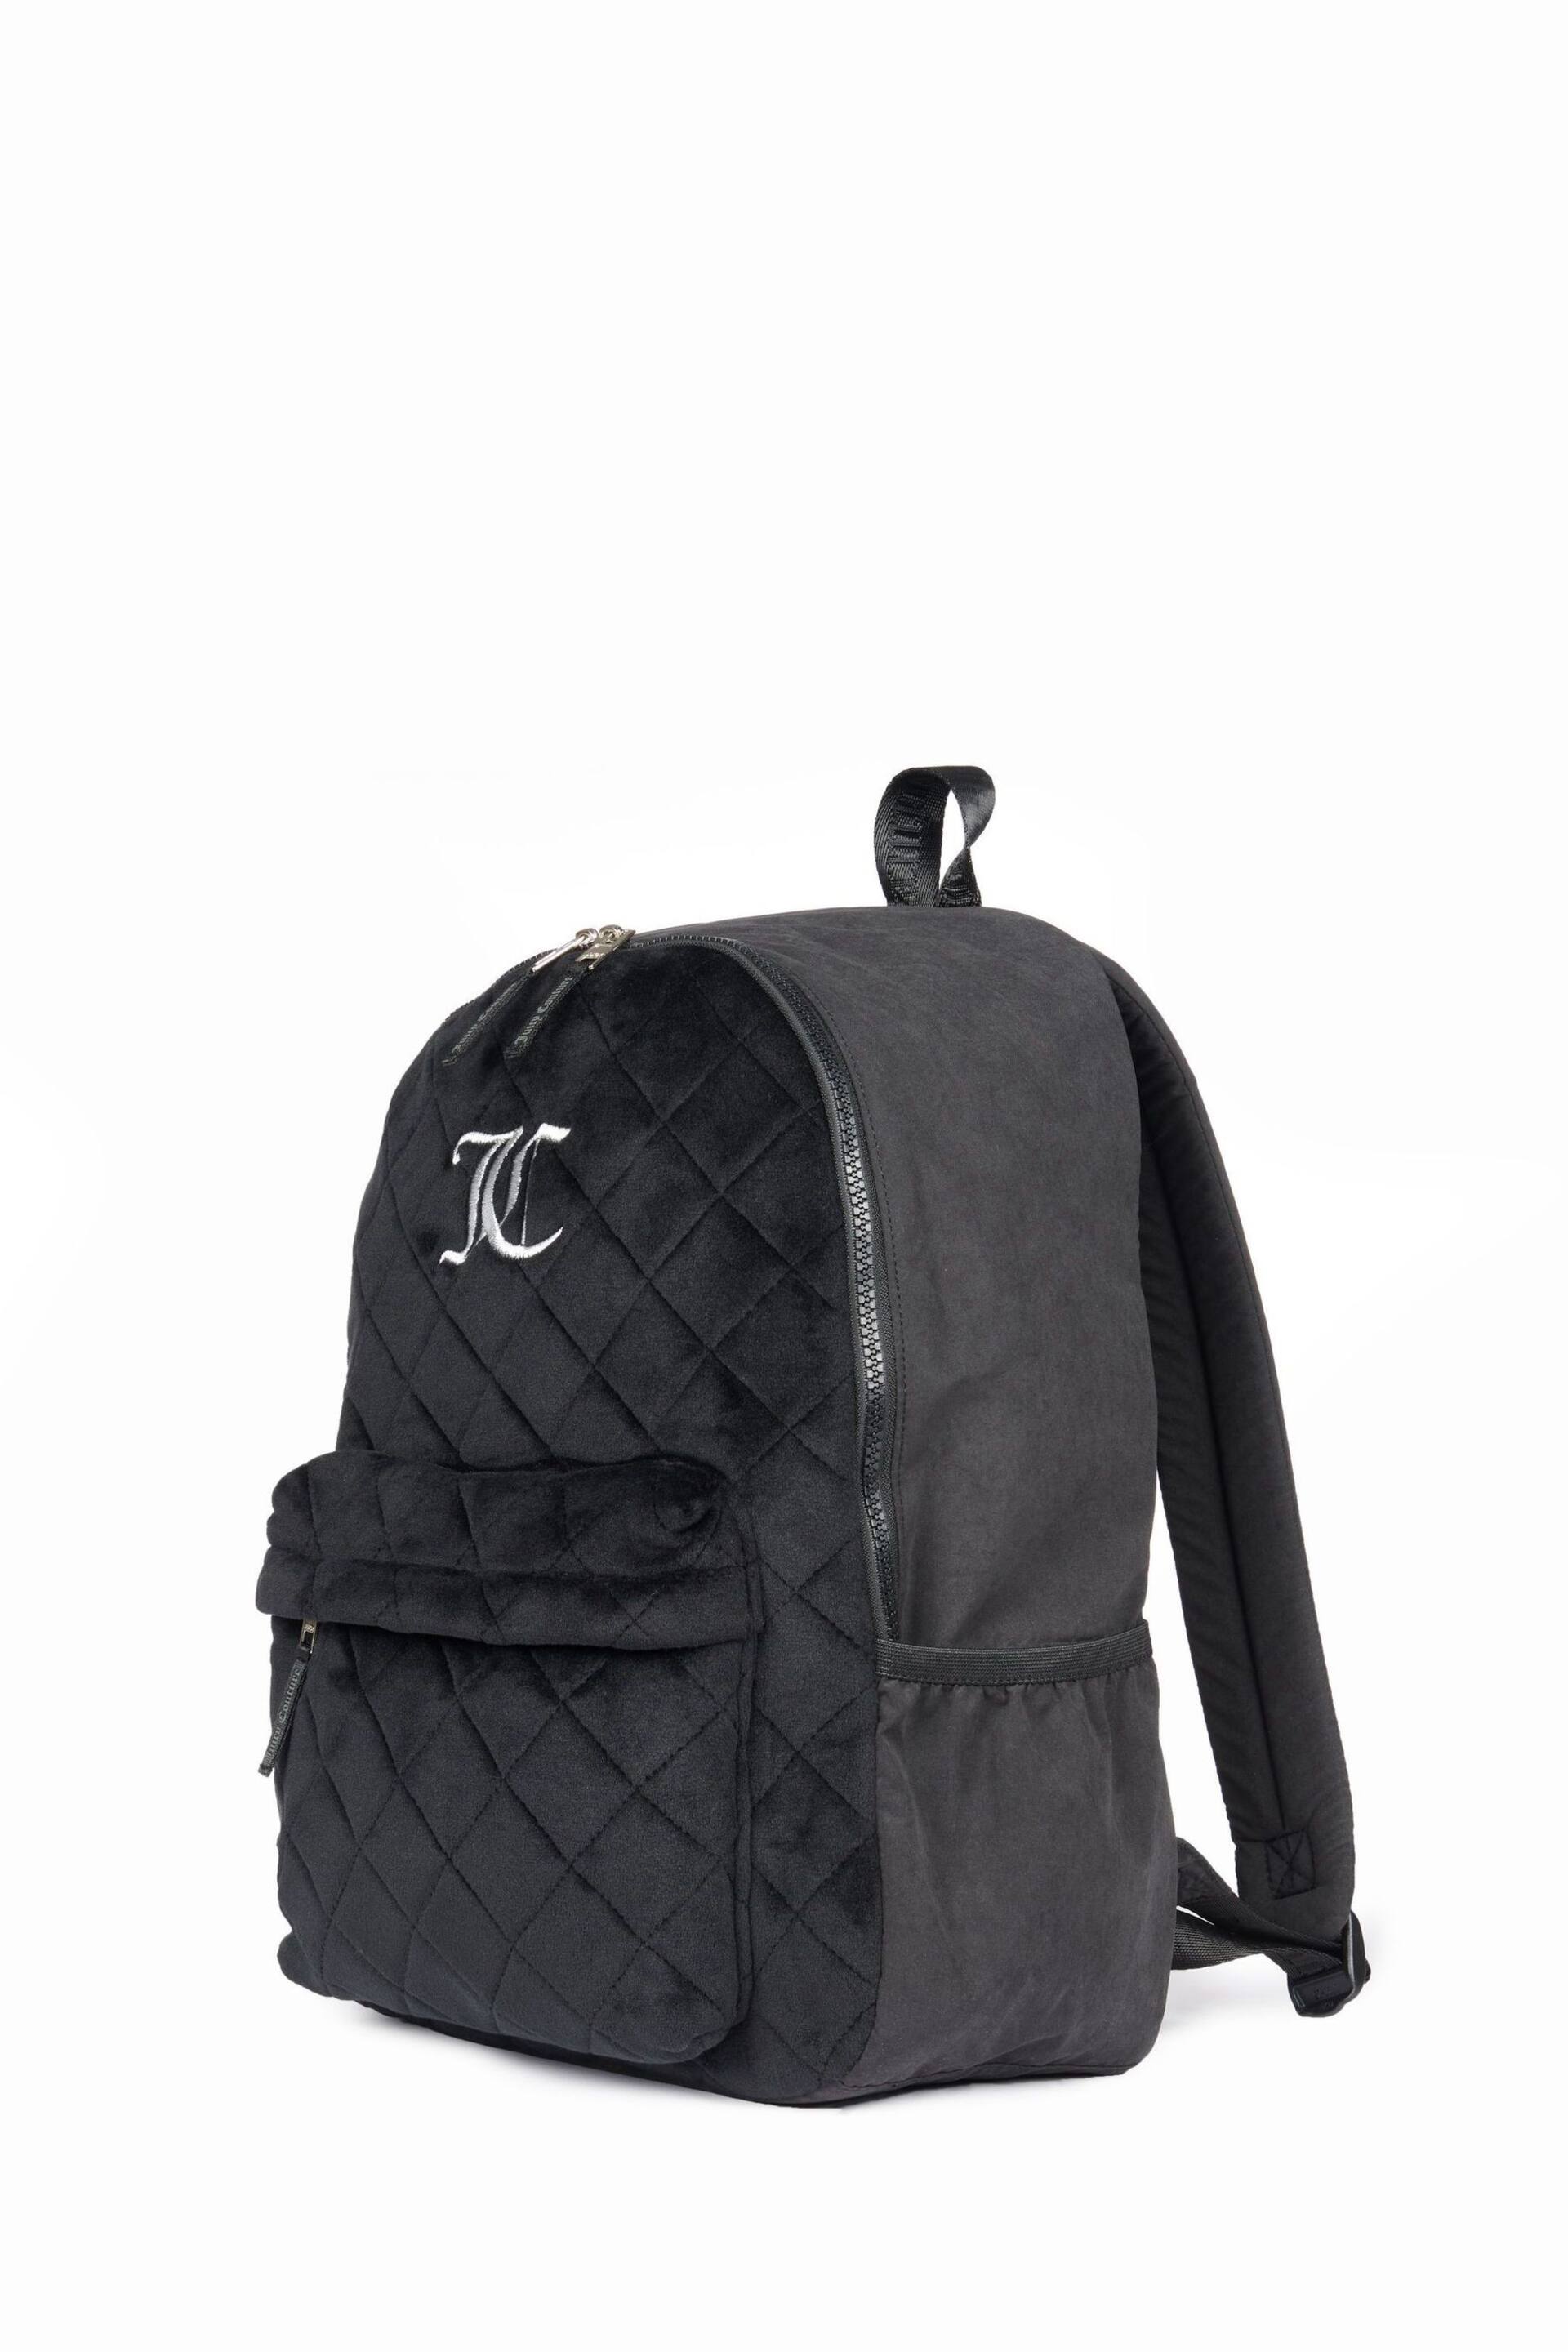 Juicy Couture Girls Quilted Velour Black Backpack - Image 4 of 10